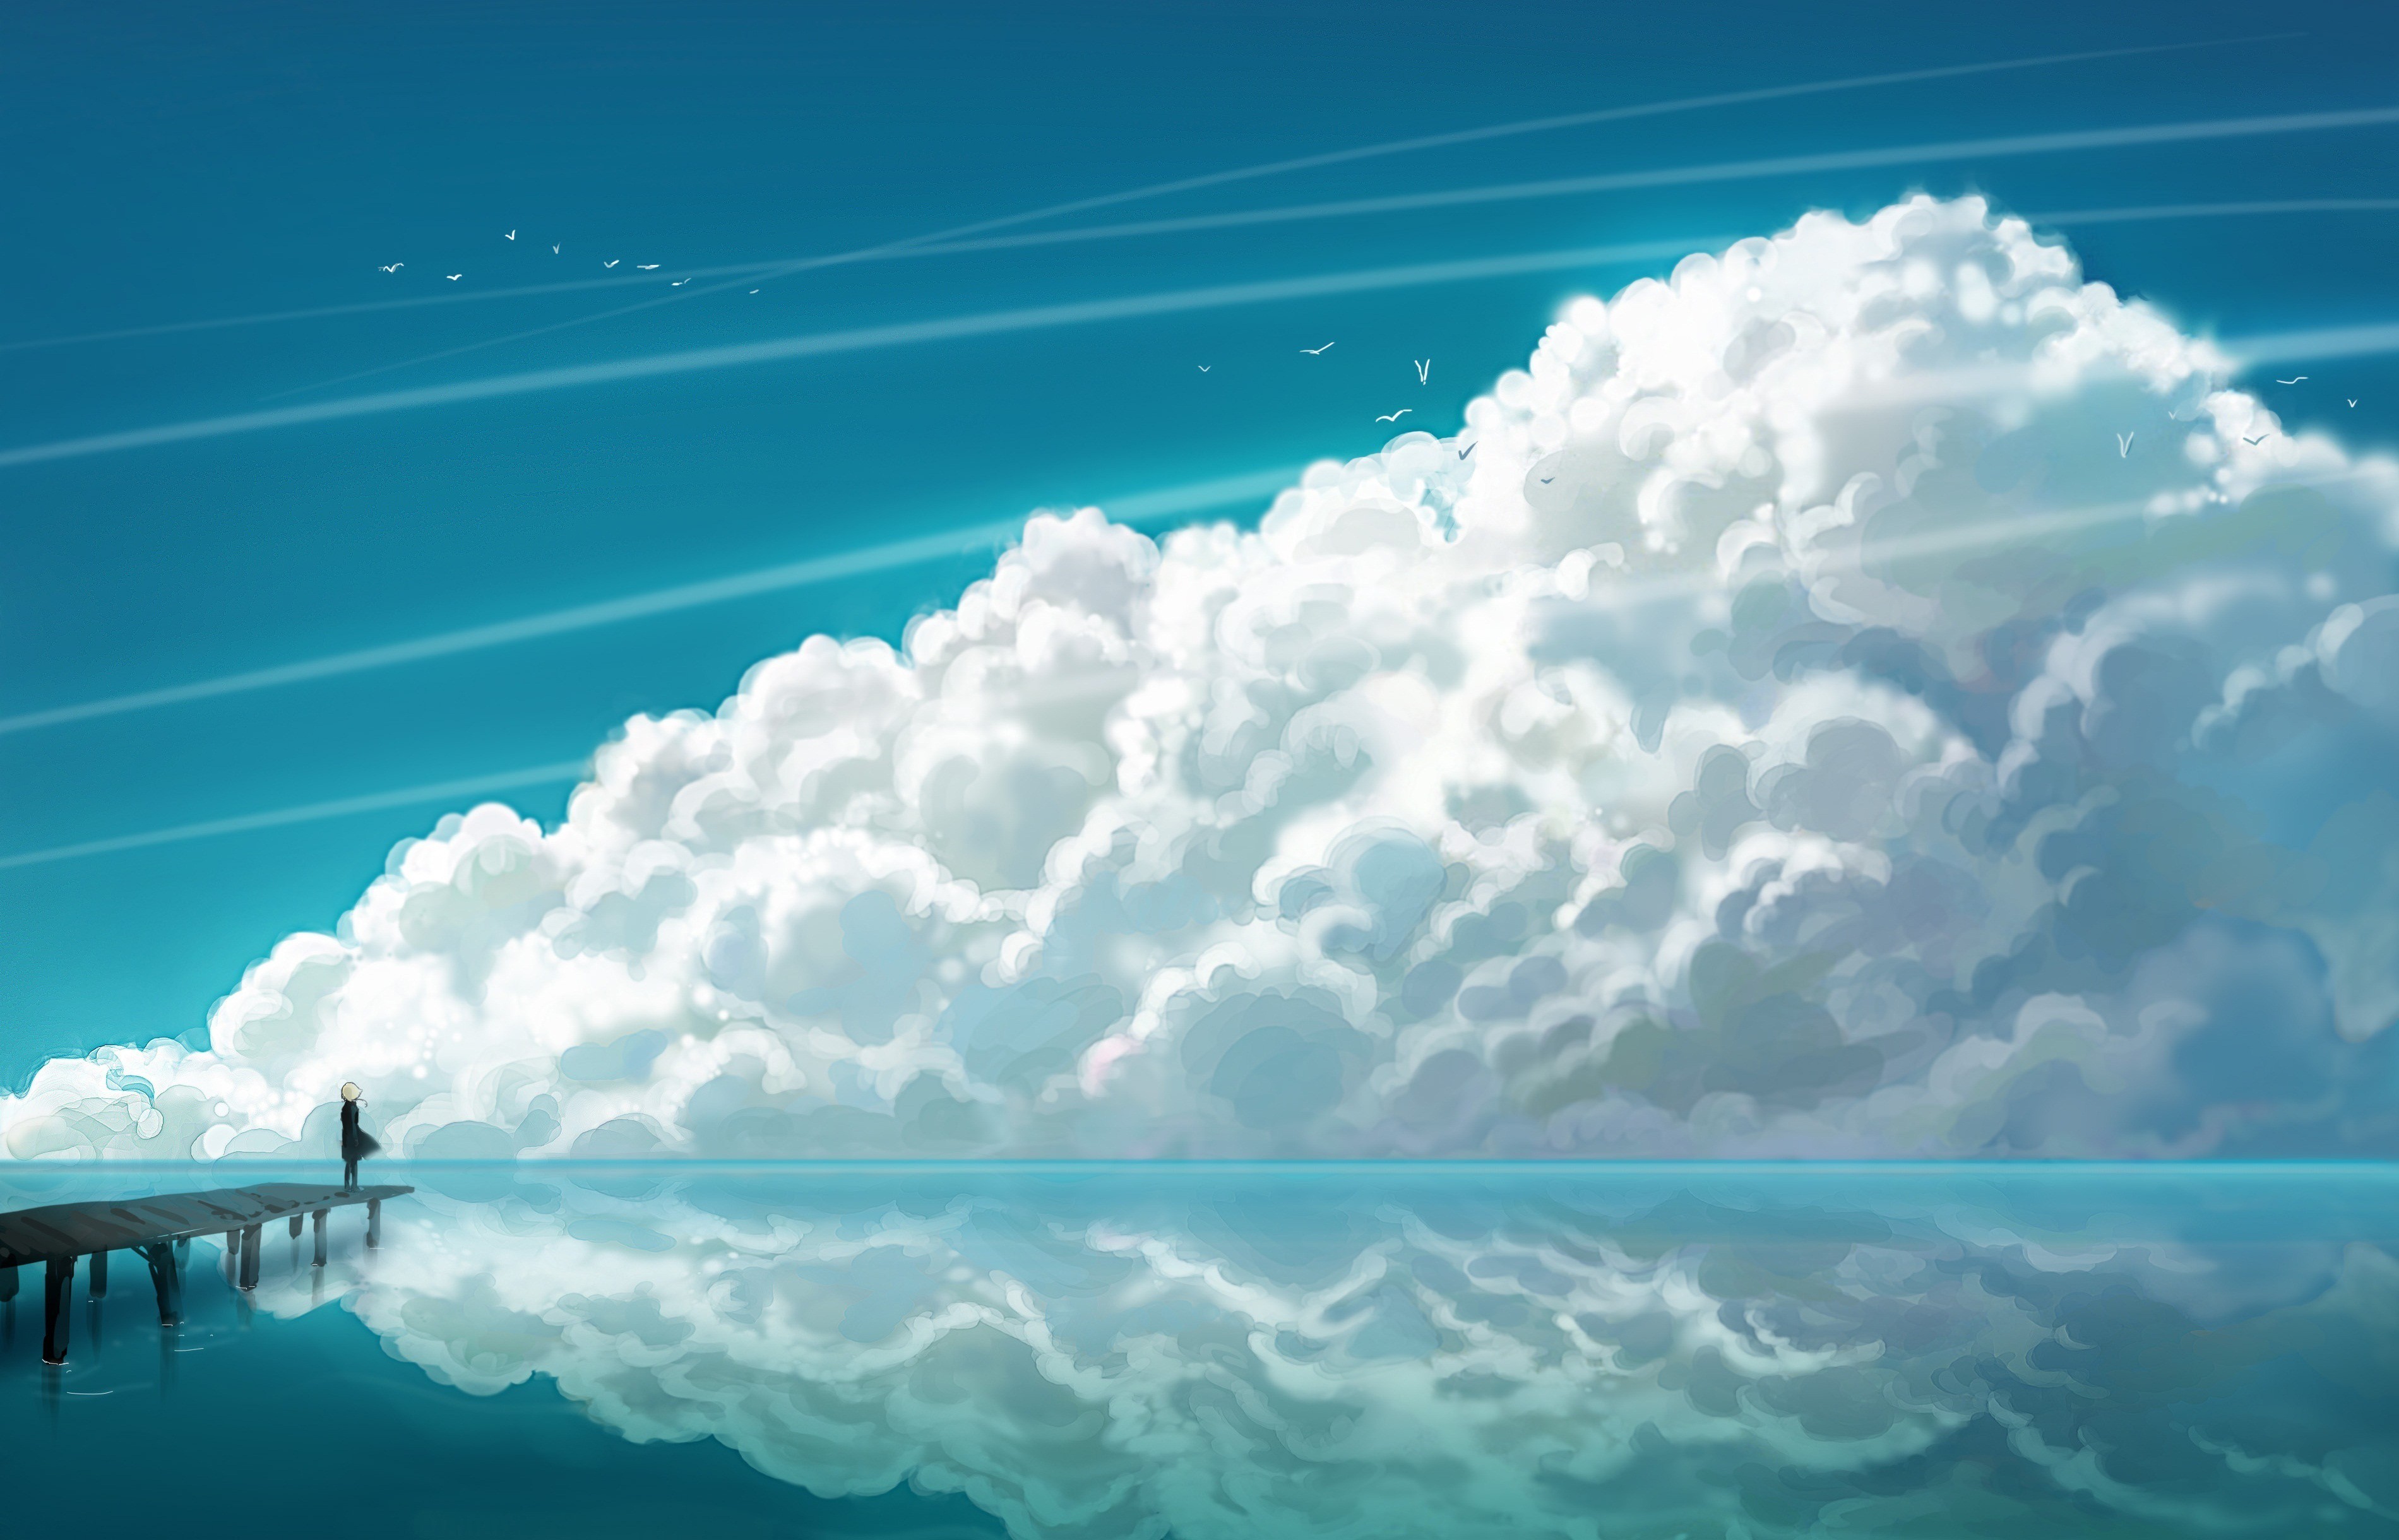  blue clouds nature anime multiscreen skyscapes wallpaper background 3800x2440